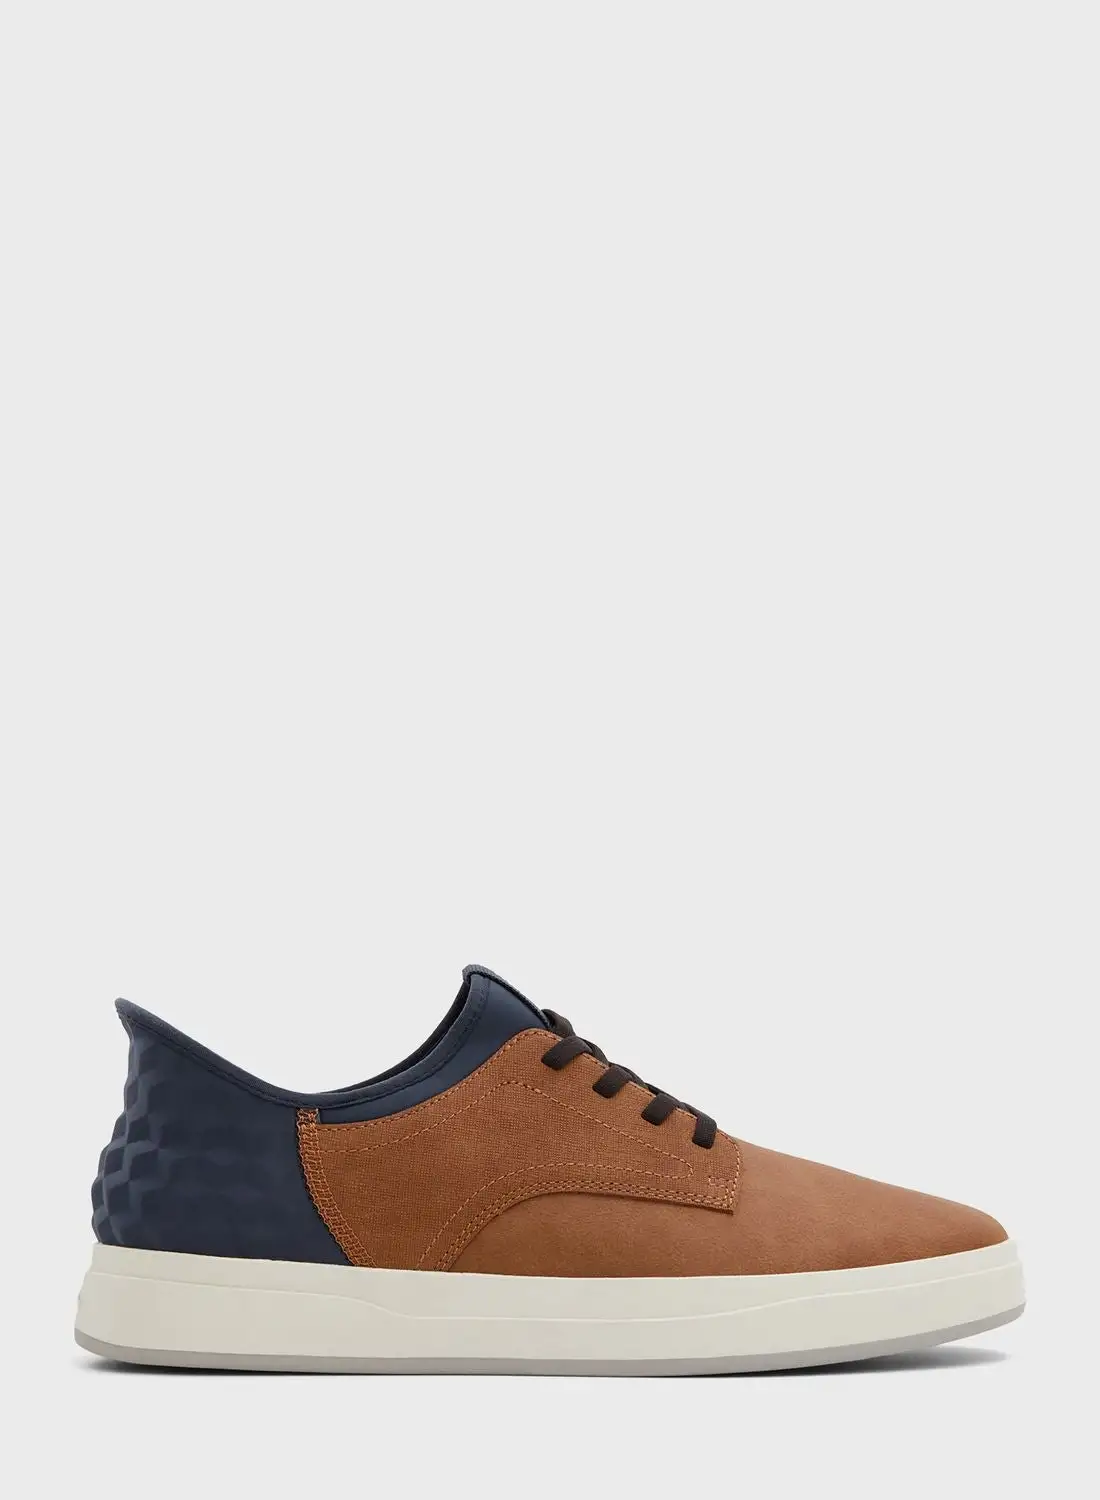 ALDO Andy Casual Lace Up Sneakers